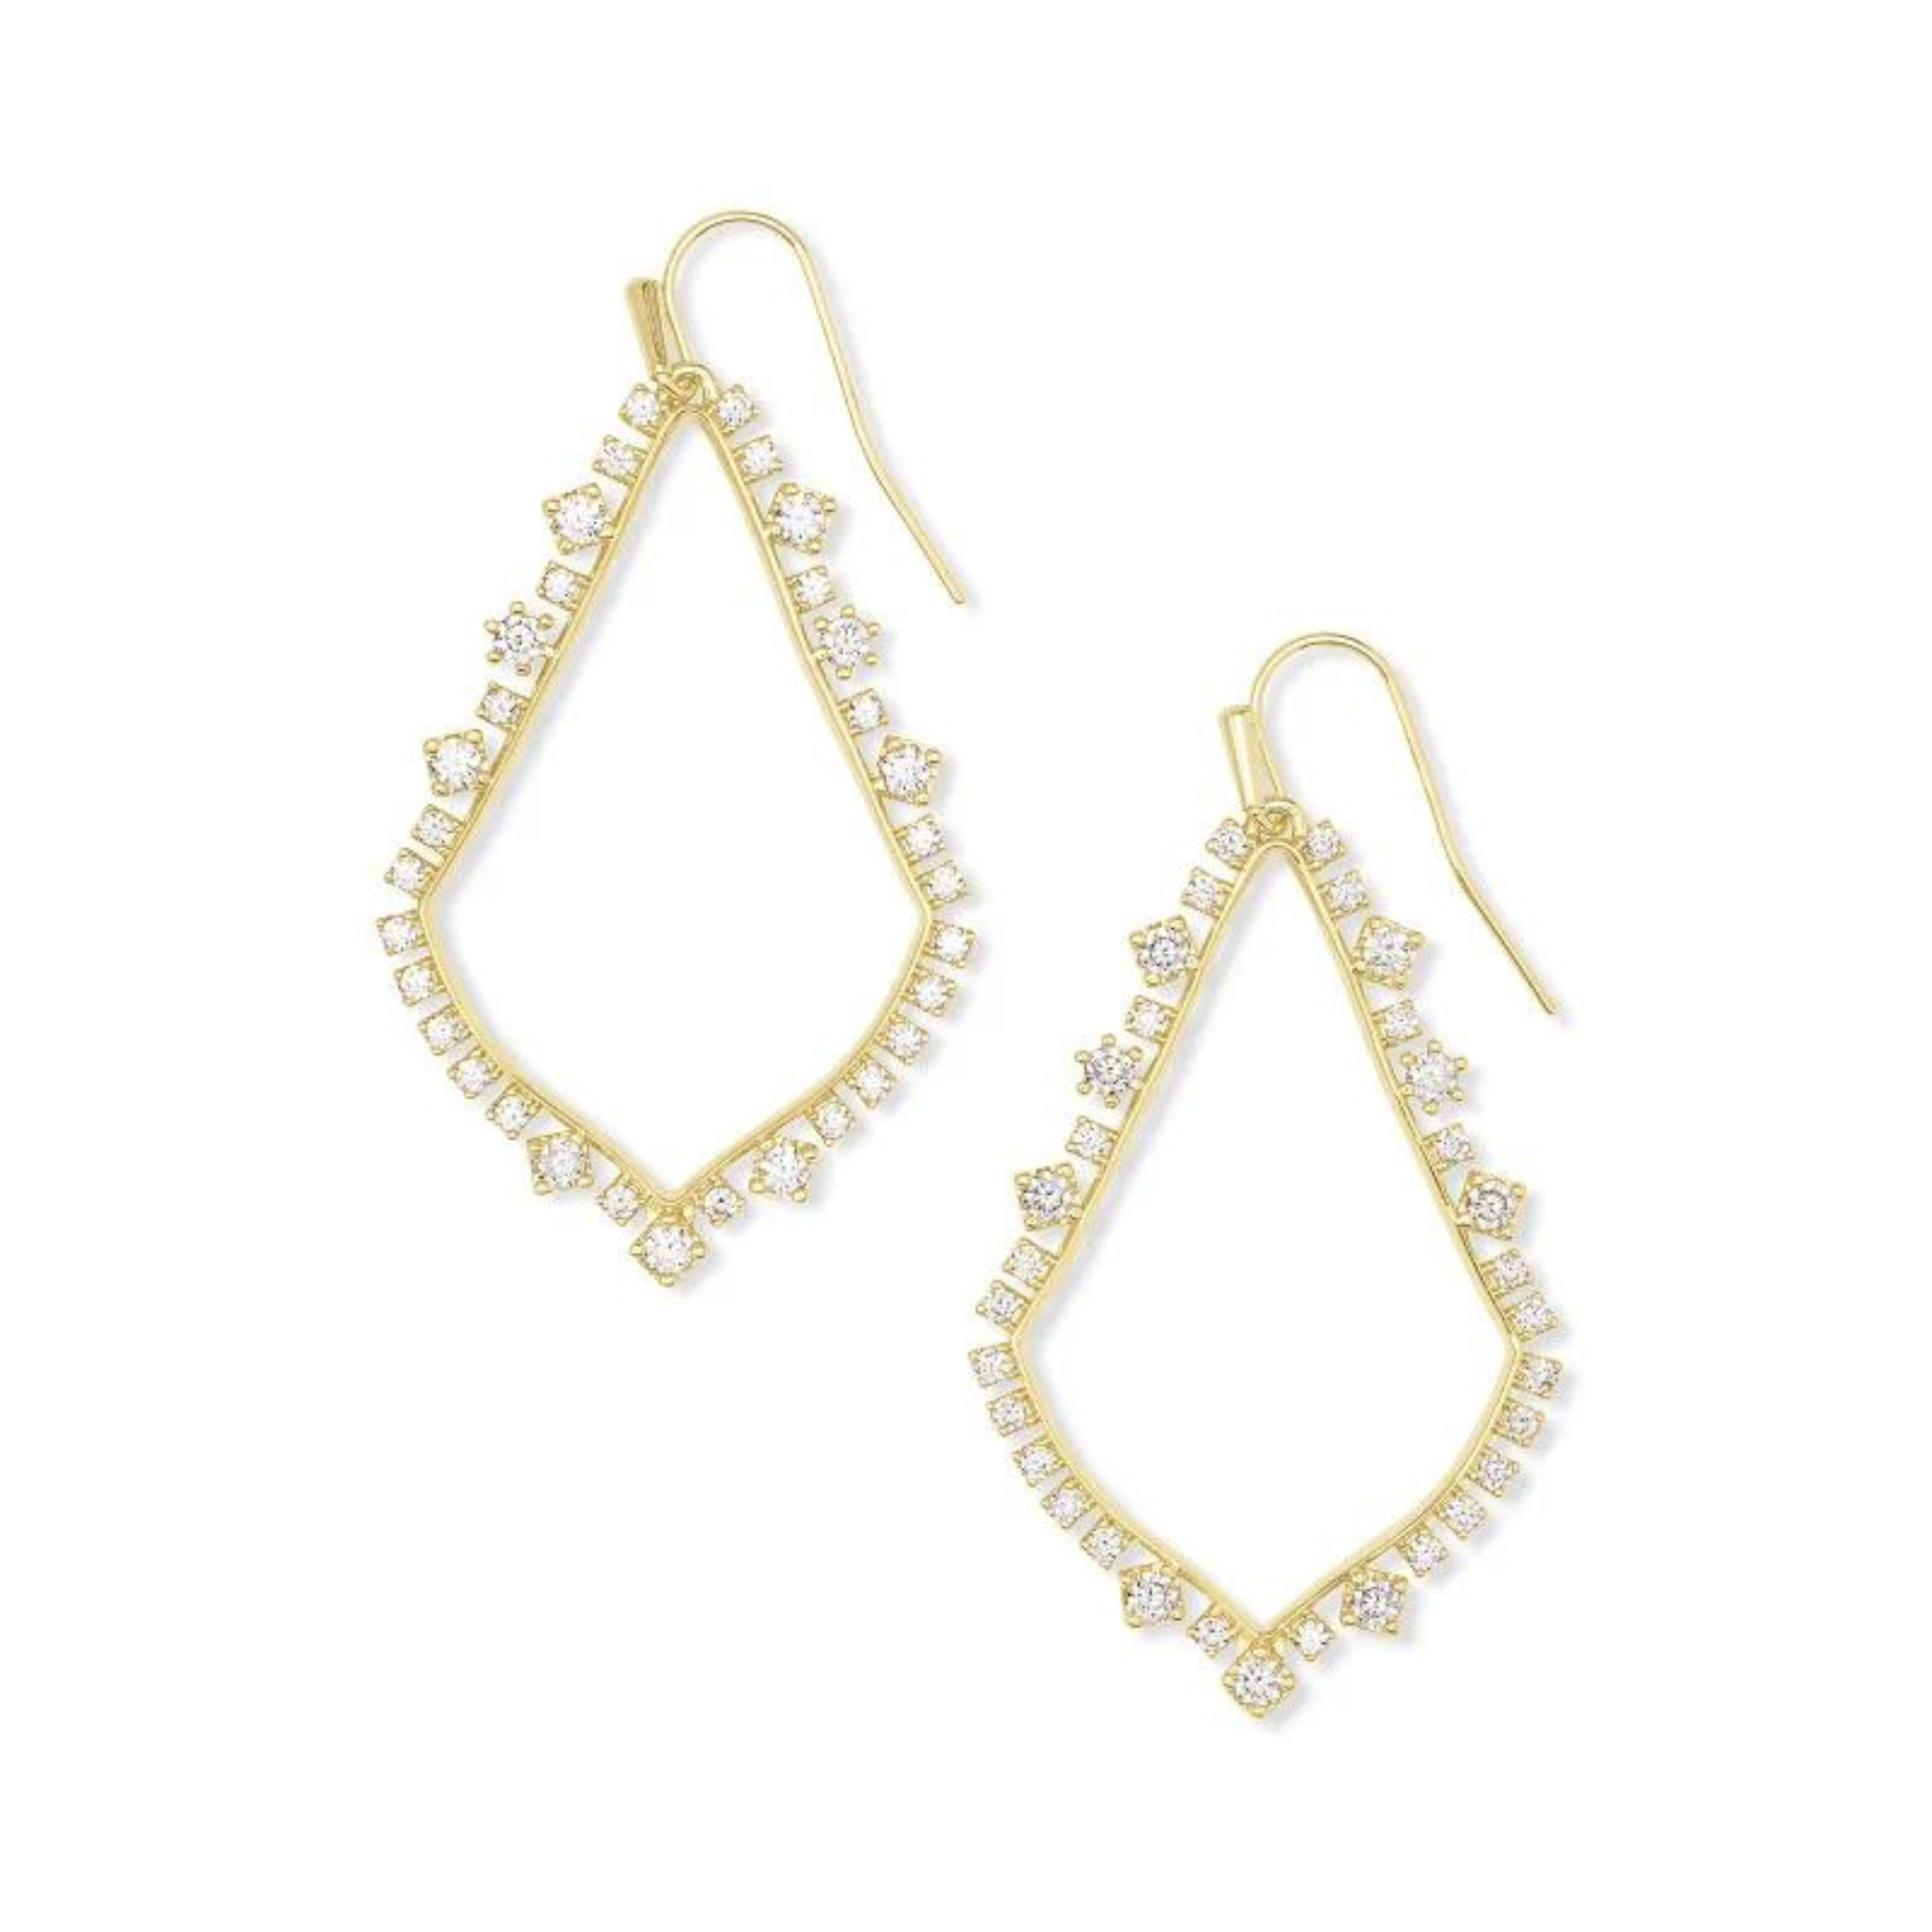 Gold crystal drop earrings, pictured on a white background.